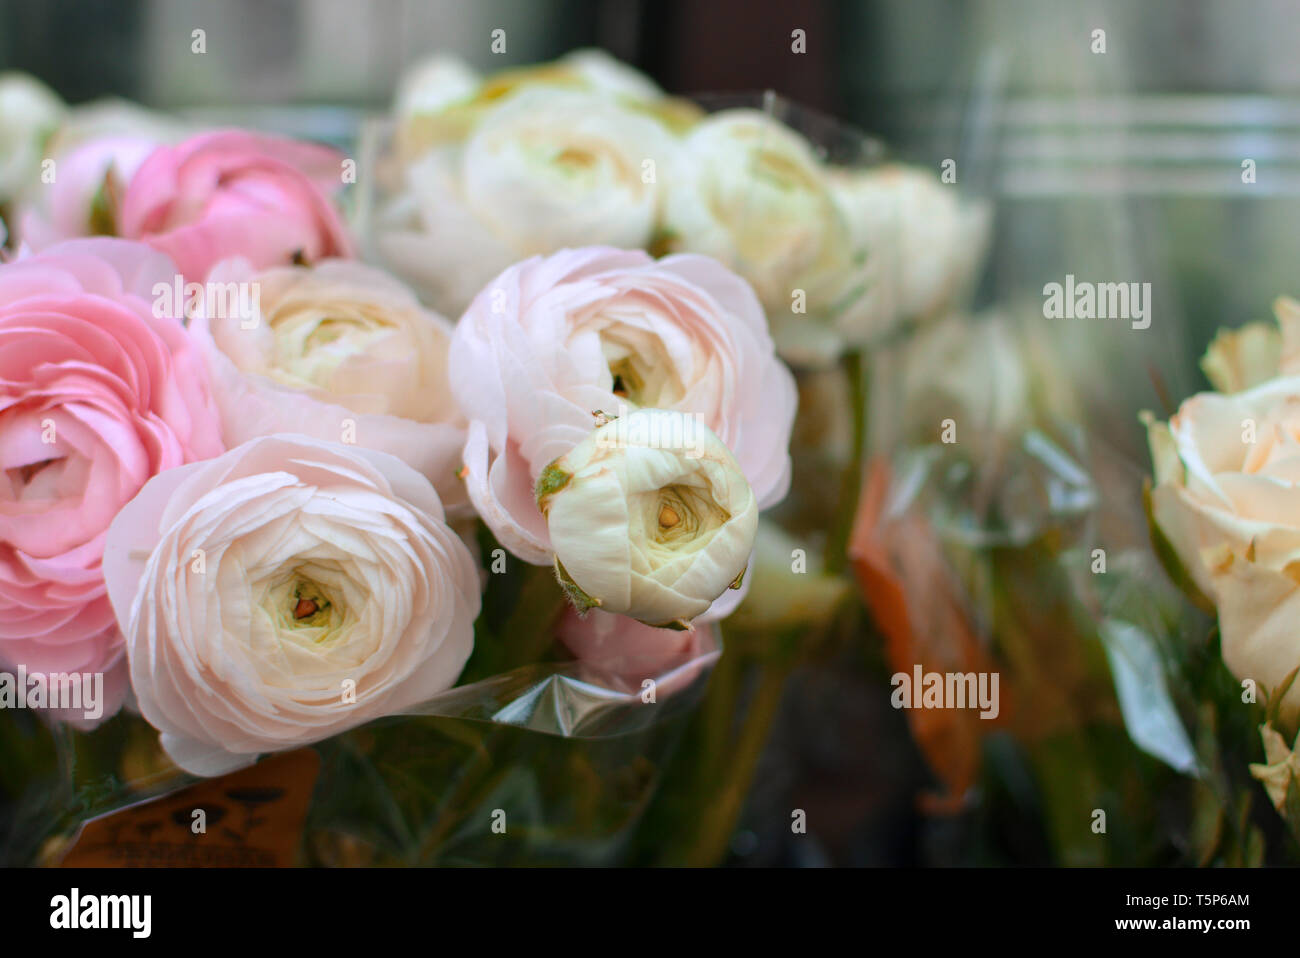 Beautiful flower bouquet with cream white and light pink Buttercup Ranunculus flowers in full bloom Stock Photo